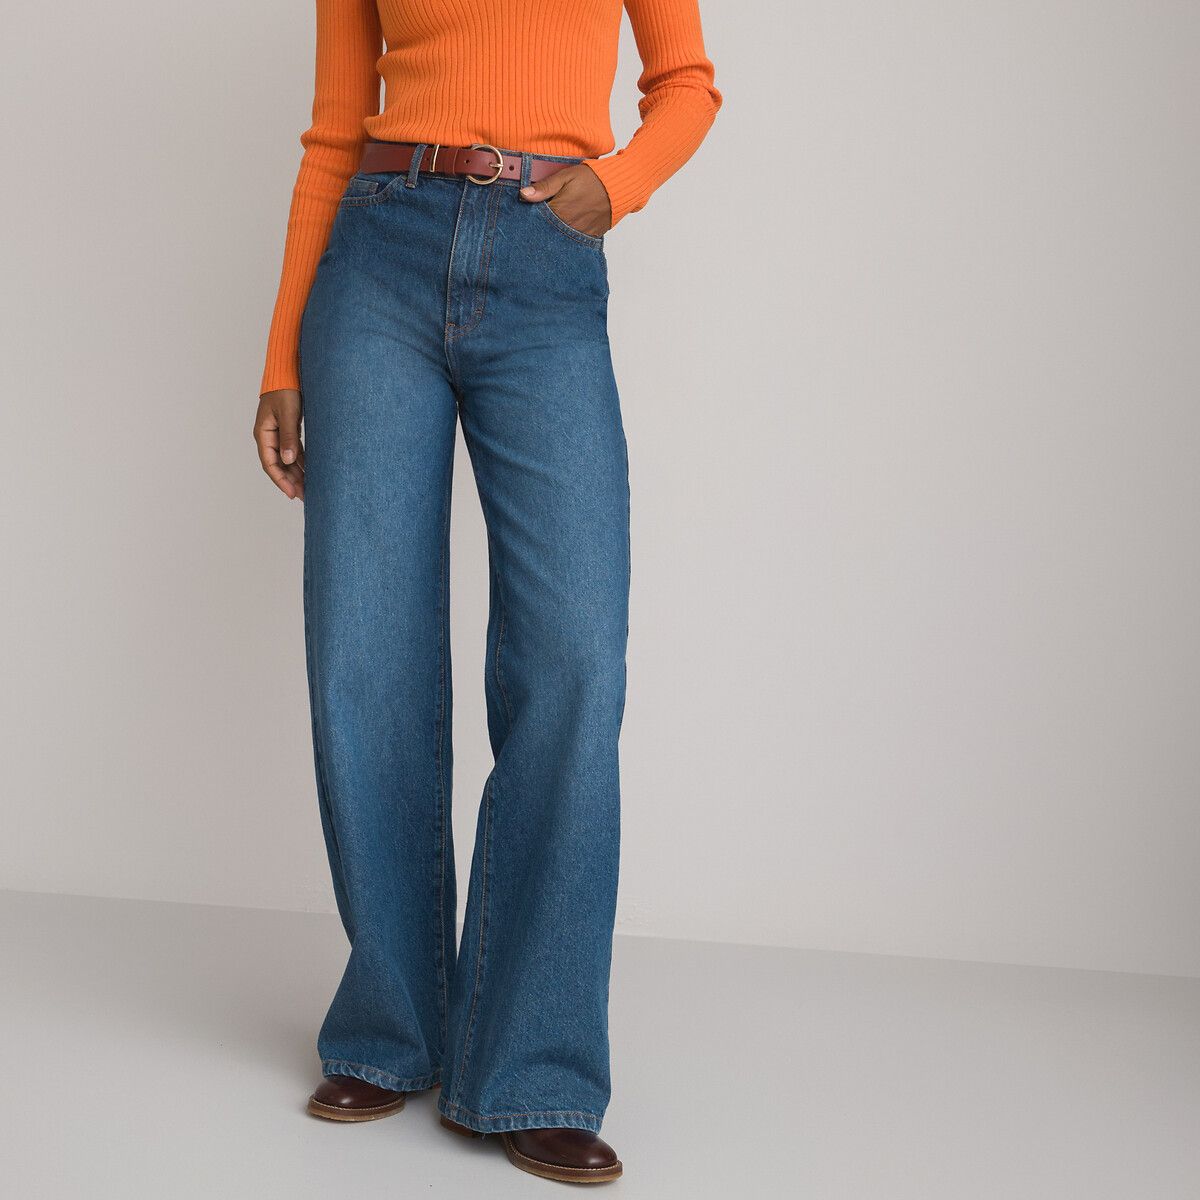 Wide Leg Jeans with High Waist, Length 32.5" | La Redoute (UK)